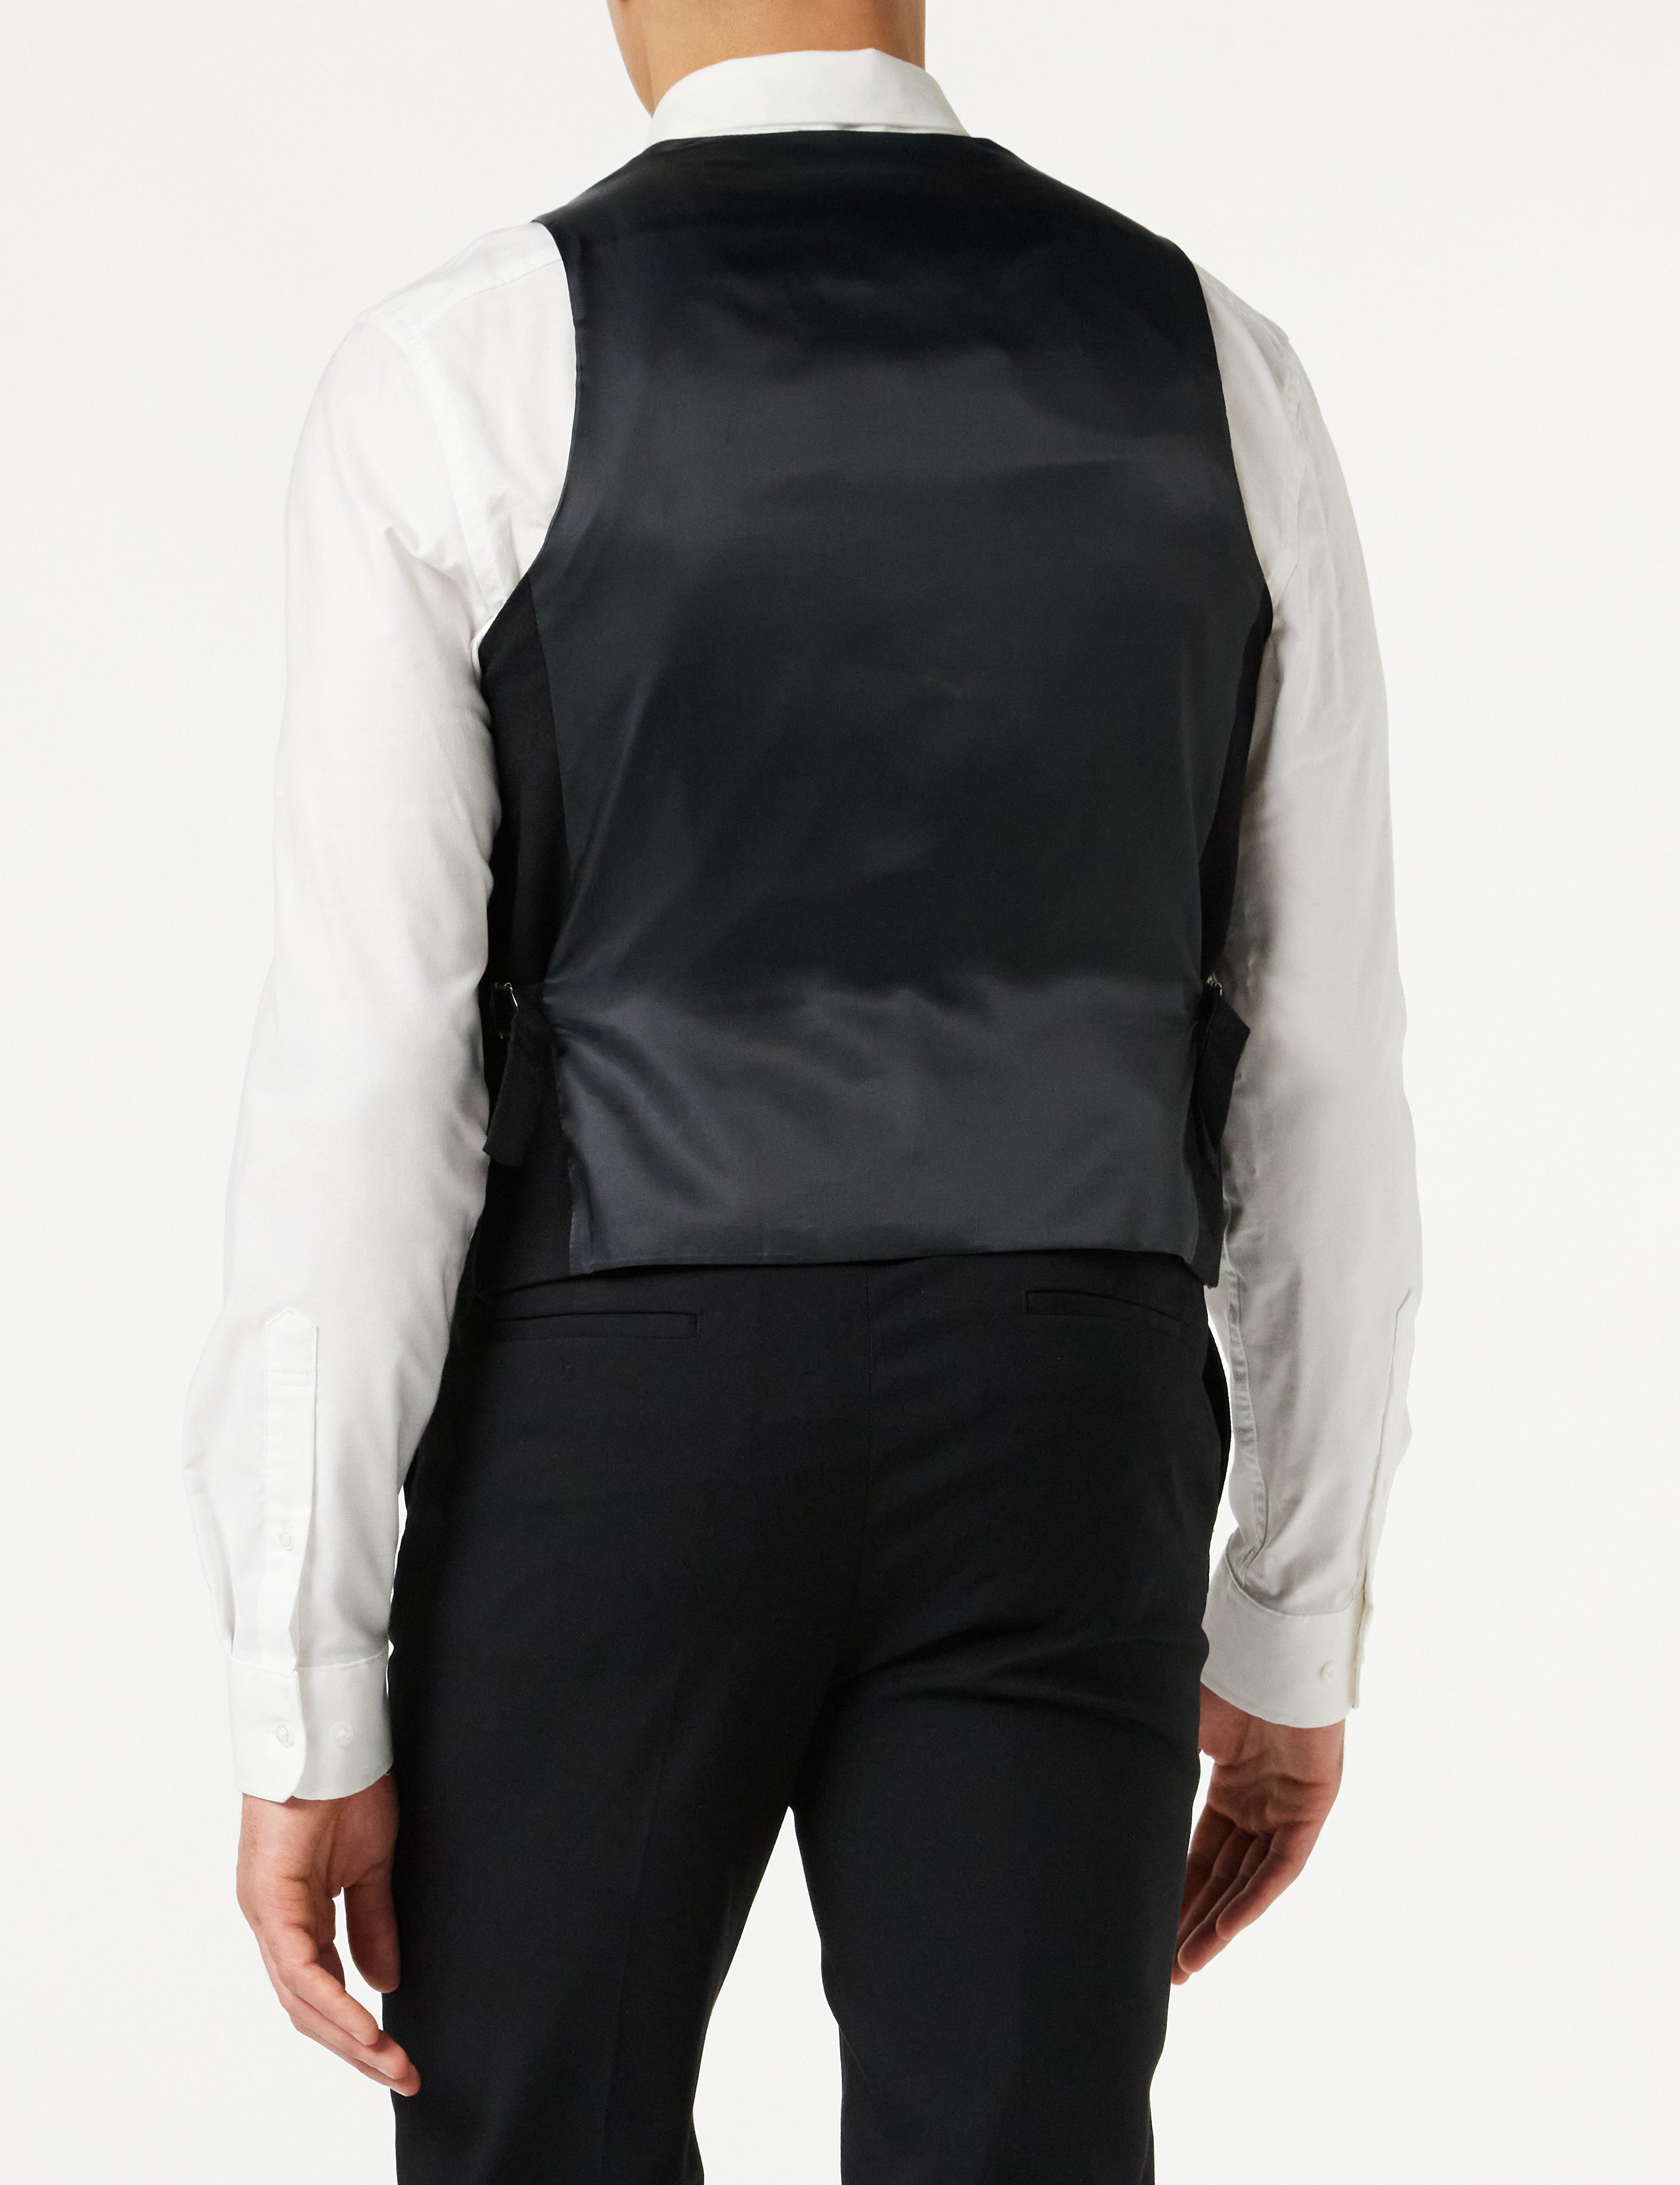 Double Breasted Black Waist Coat